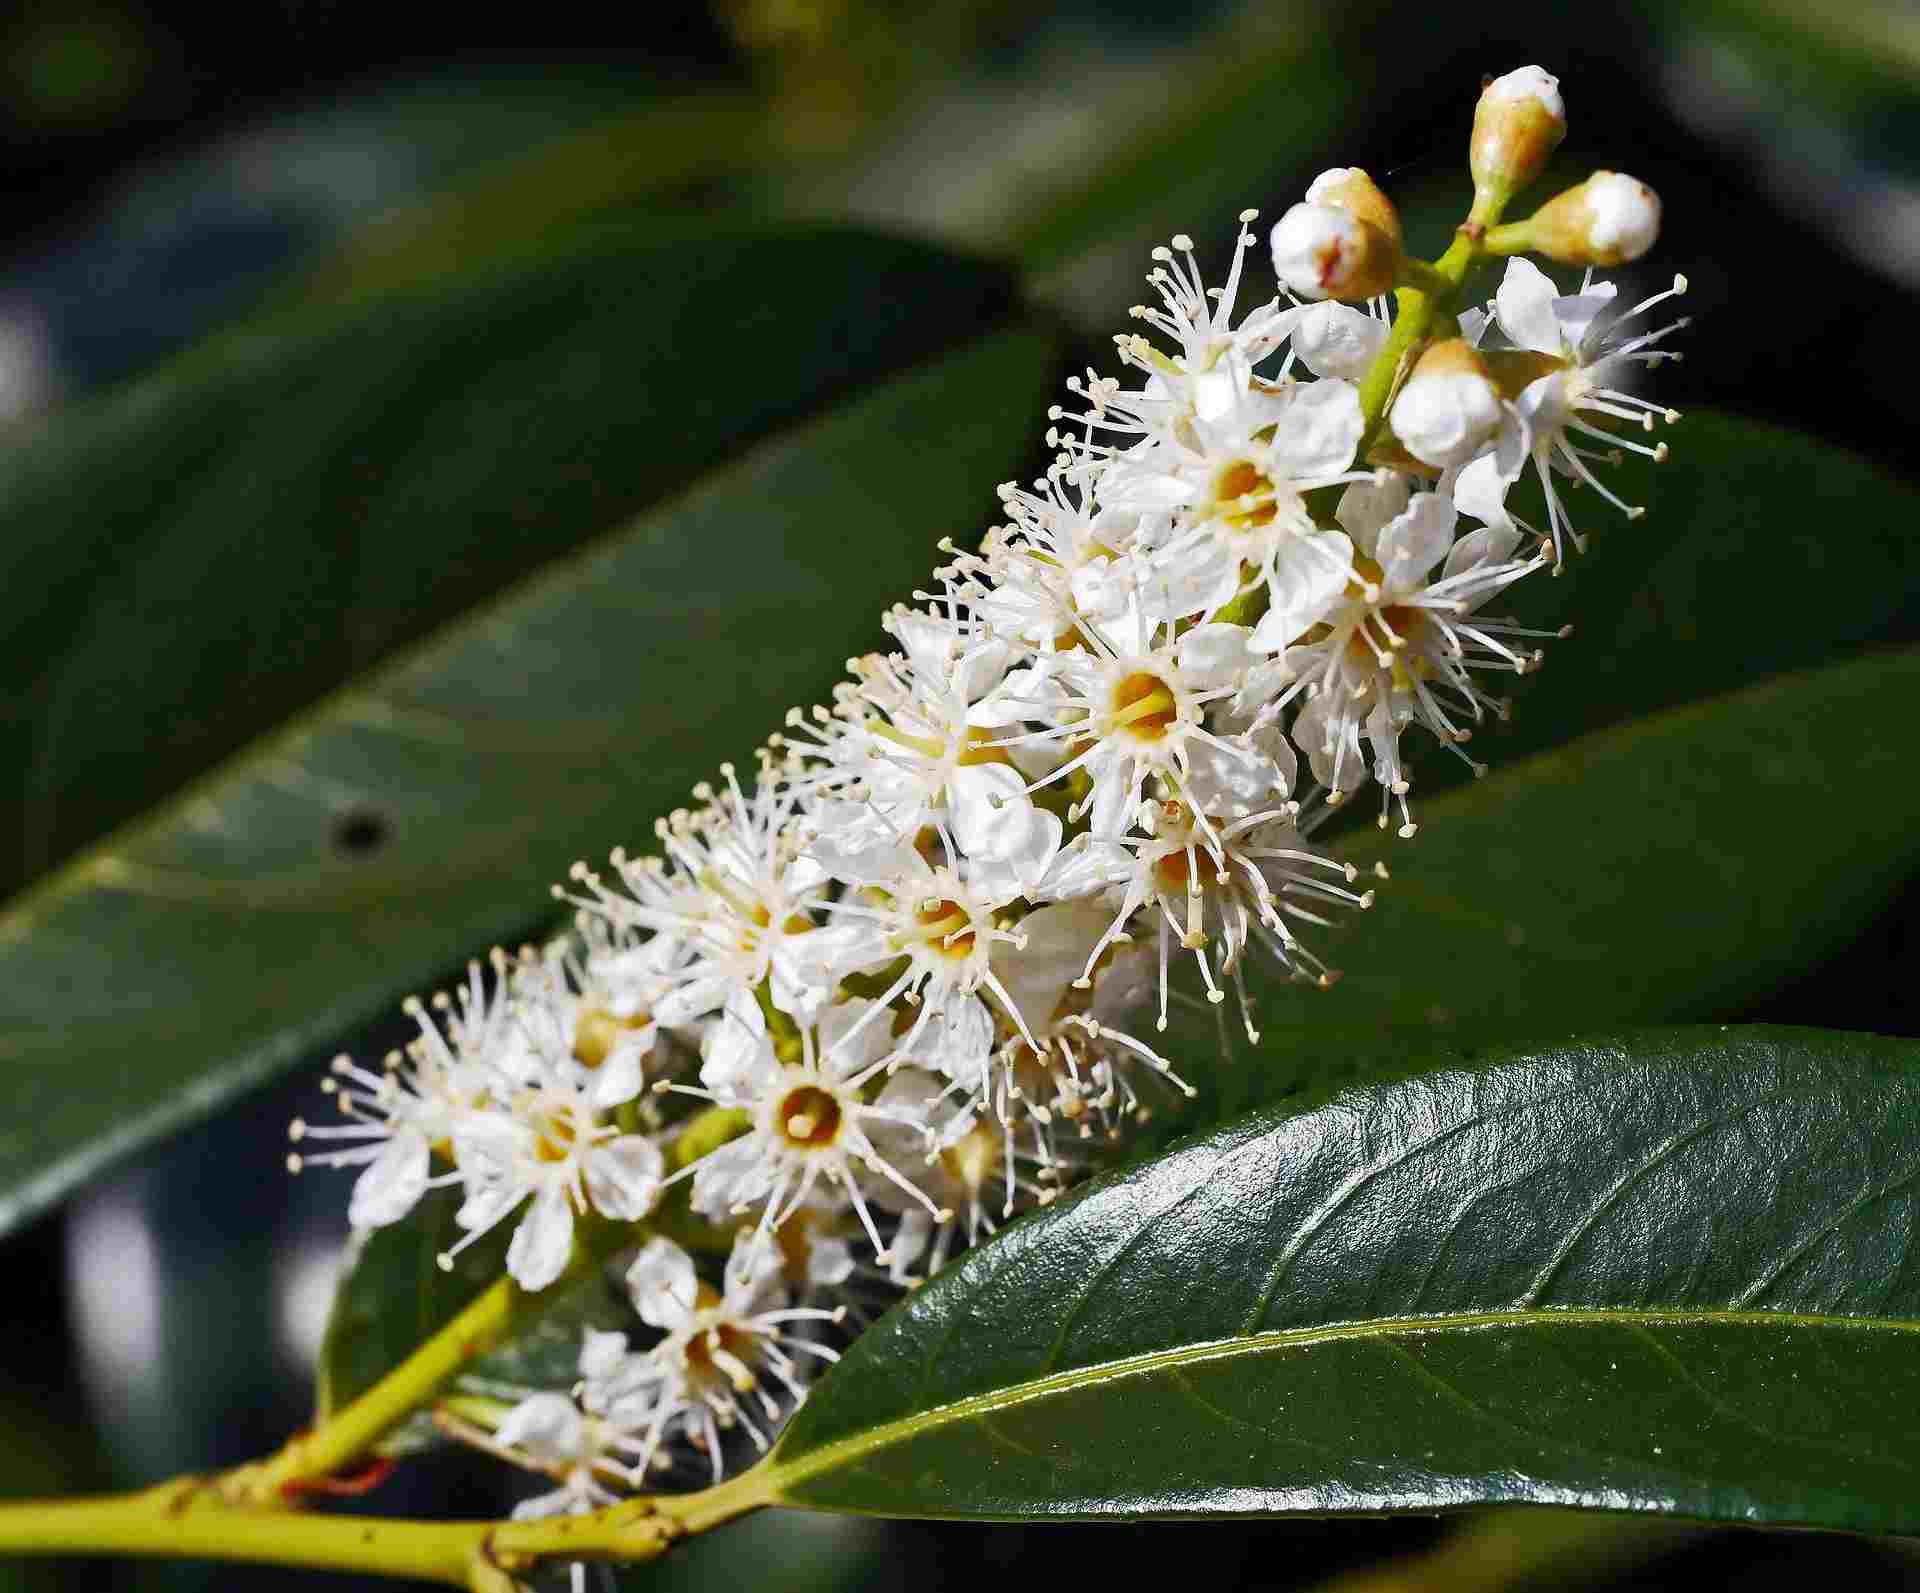 The seeds of the Cherry Laurel tree are poisonous.